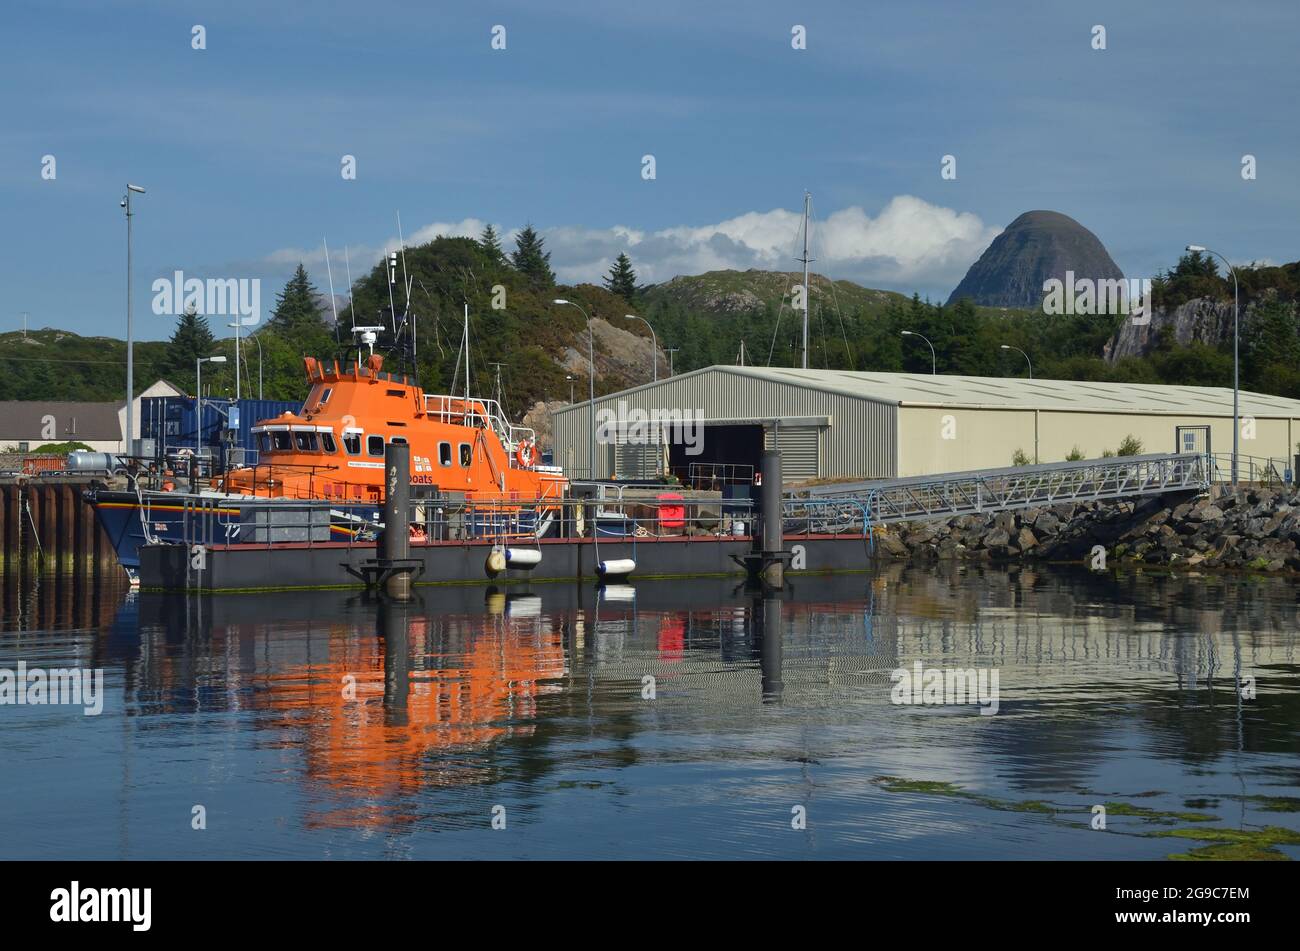 The RNLI lifeboat at Lochinver Harbour, Scotland, UK Stock Photo